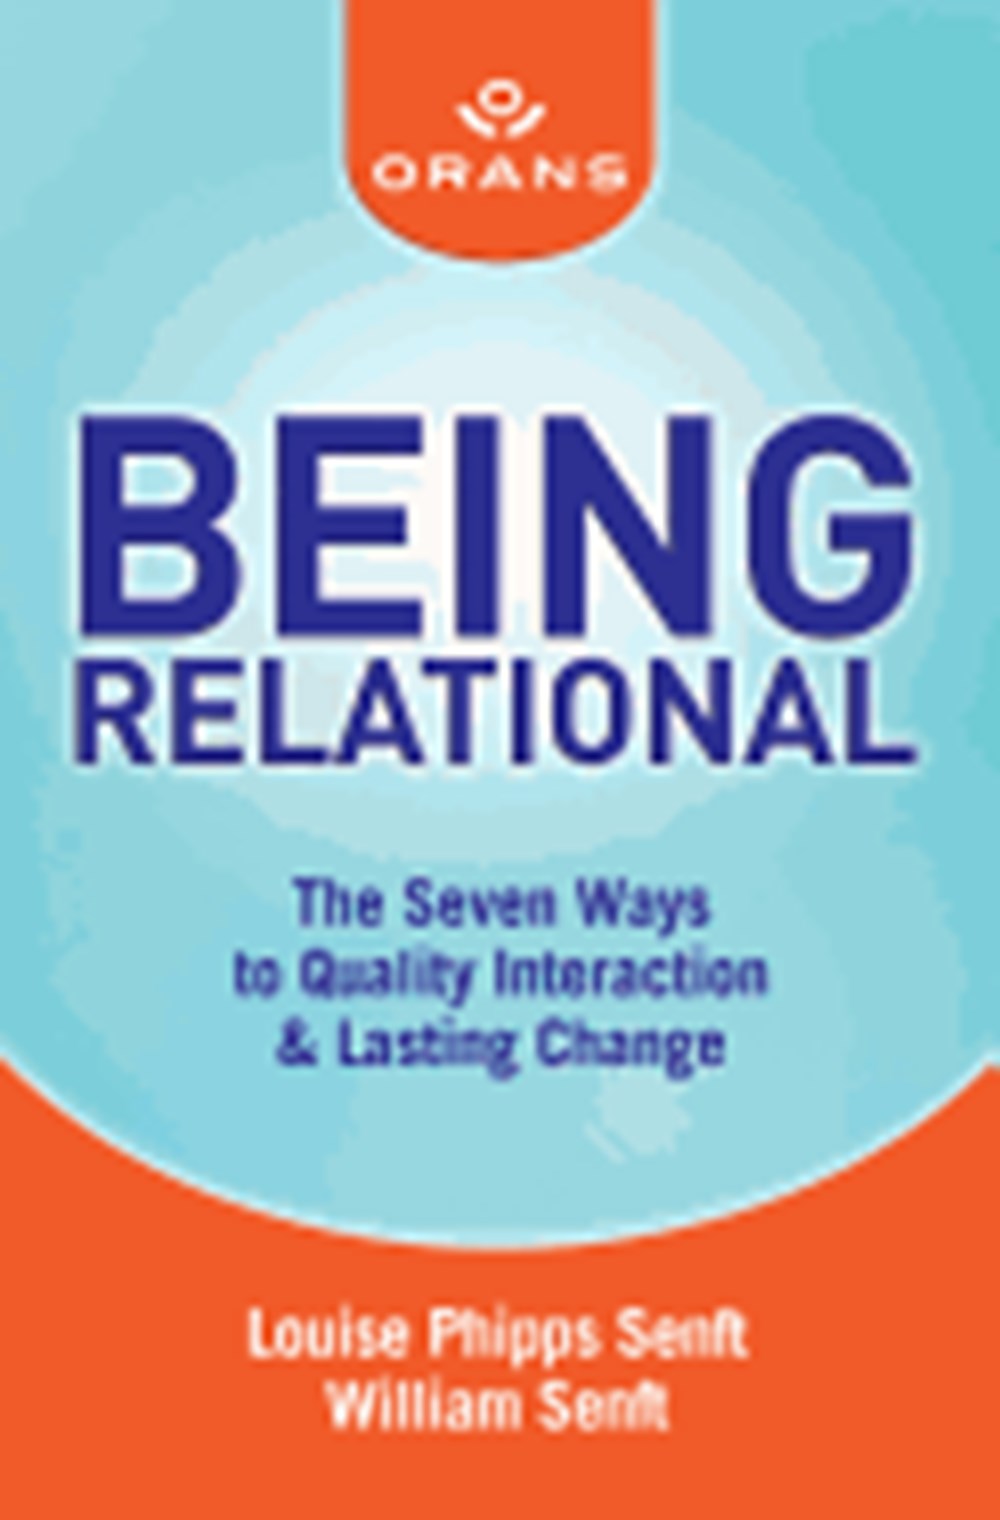 Being Relational: The Seven Ways to Quality Interaction & Lasting Change